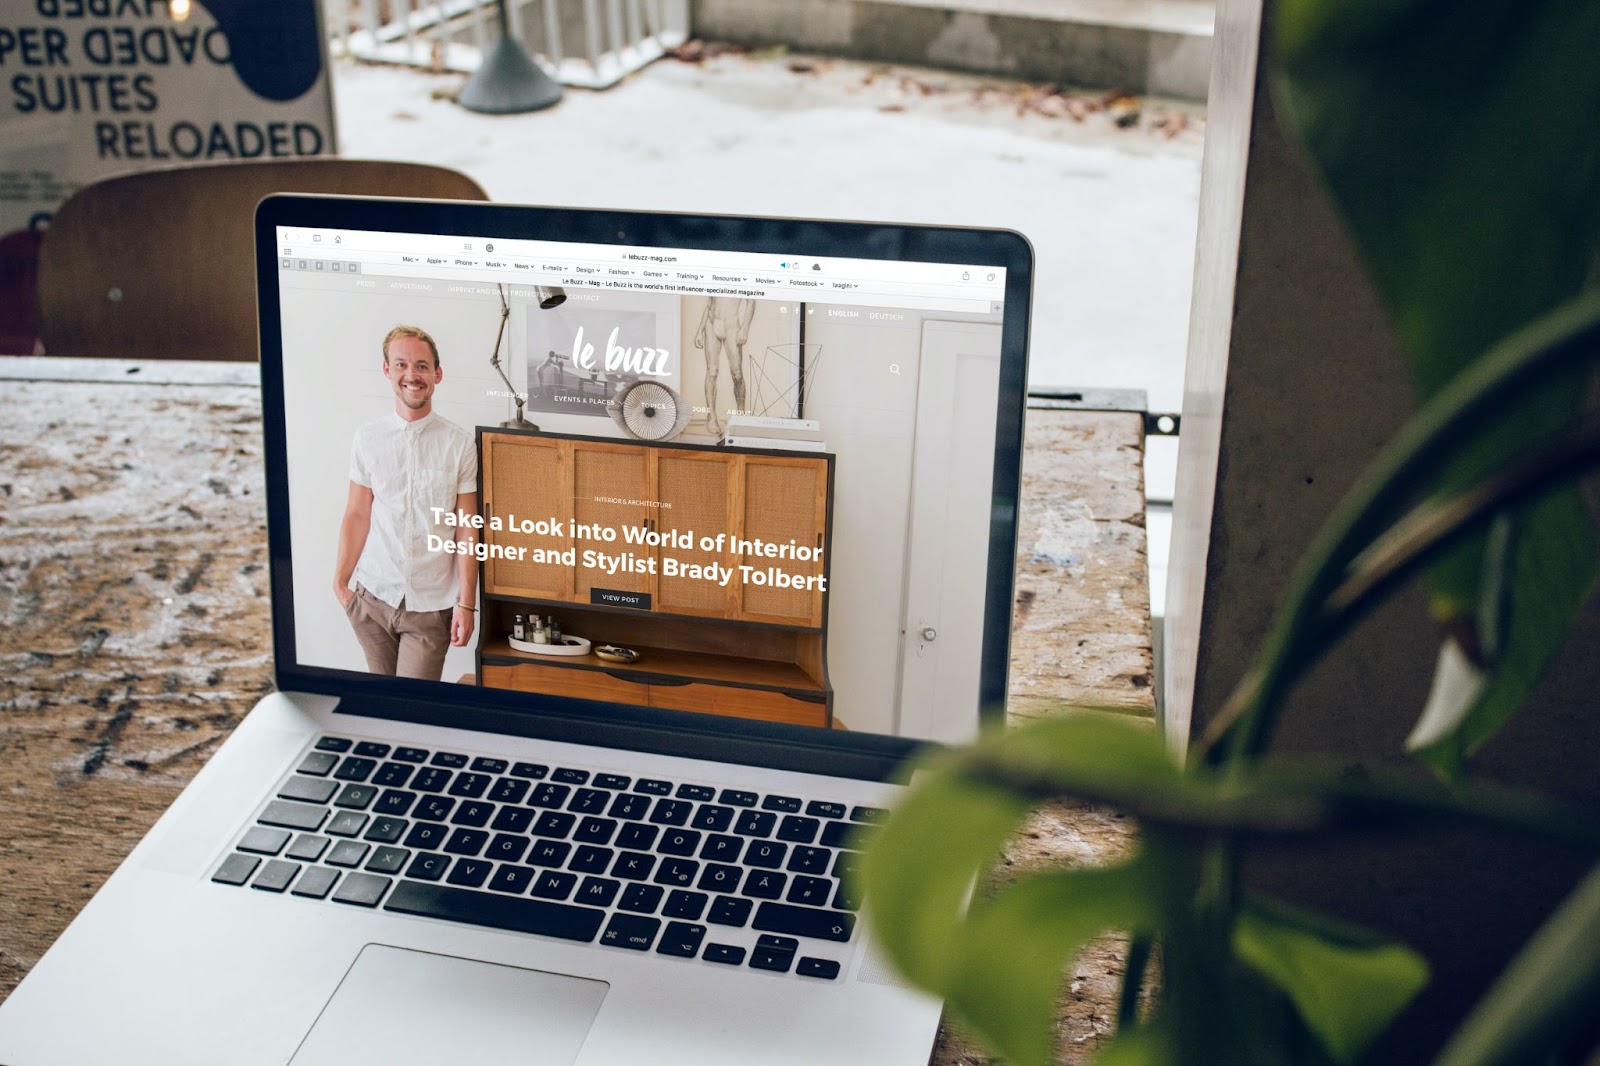 An image of a laptop displaying a clean, simple website for Le Buzz. The word 'the' is missing from the phrase "Take a Look into World of Interior Designer and Stylist Brady Tolbert"